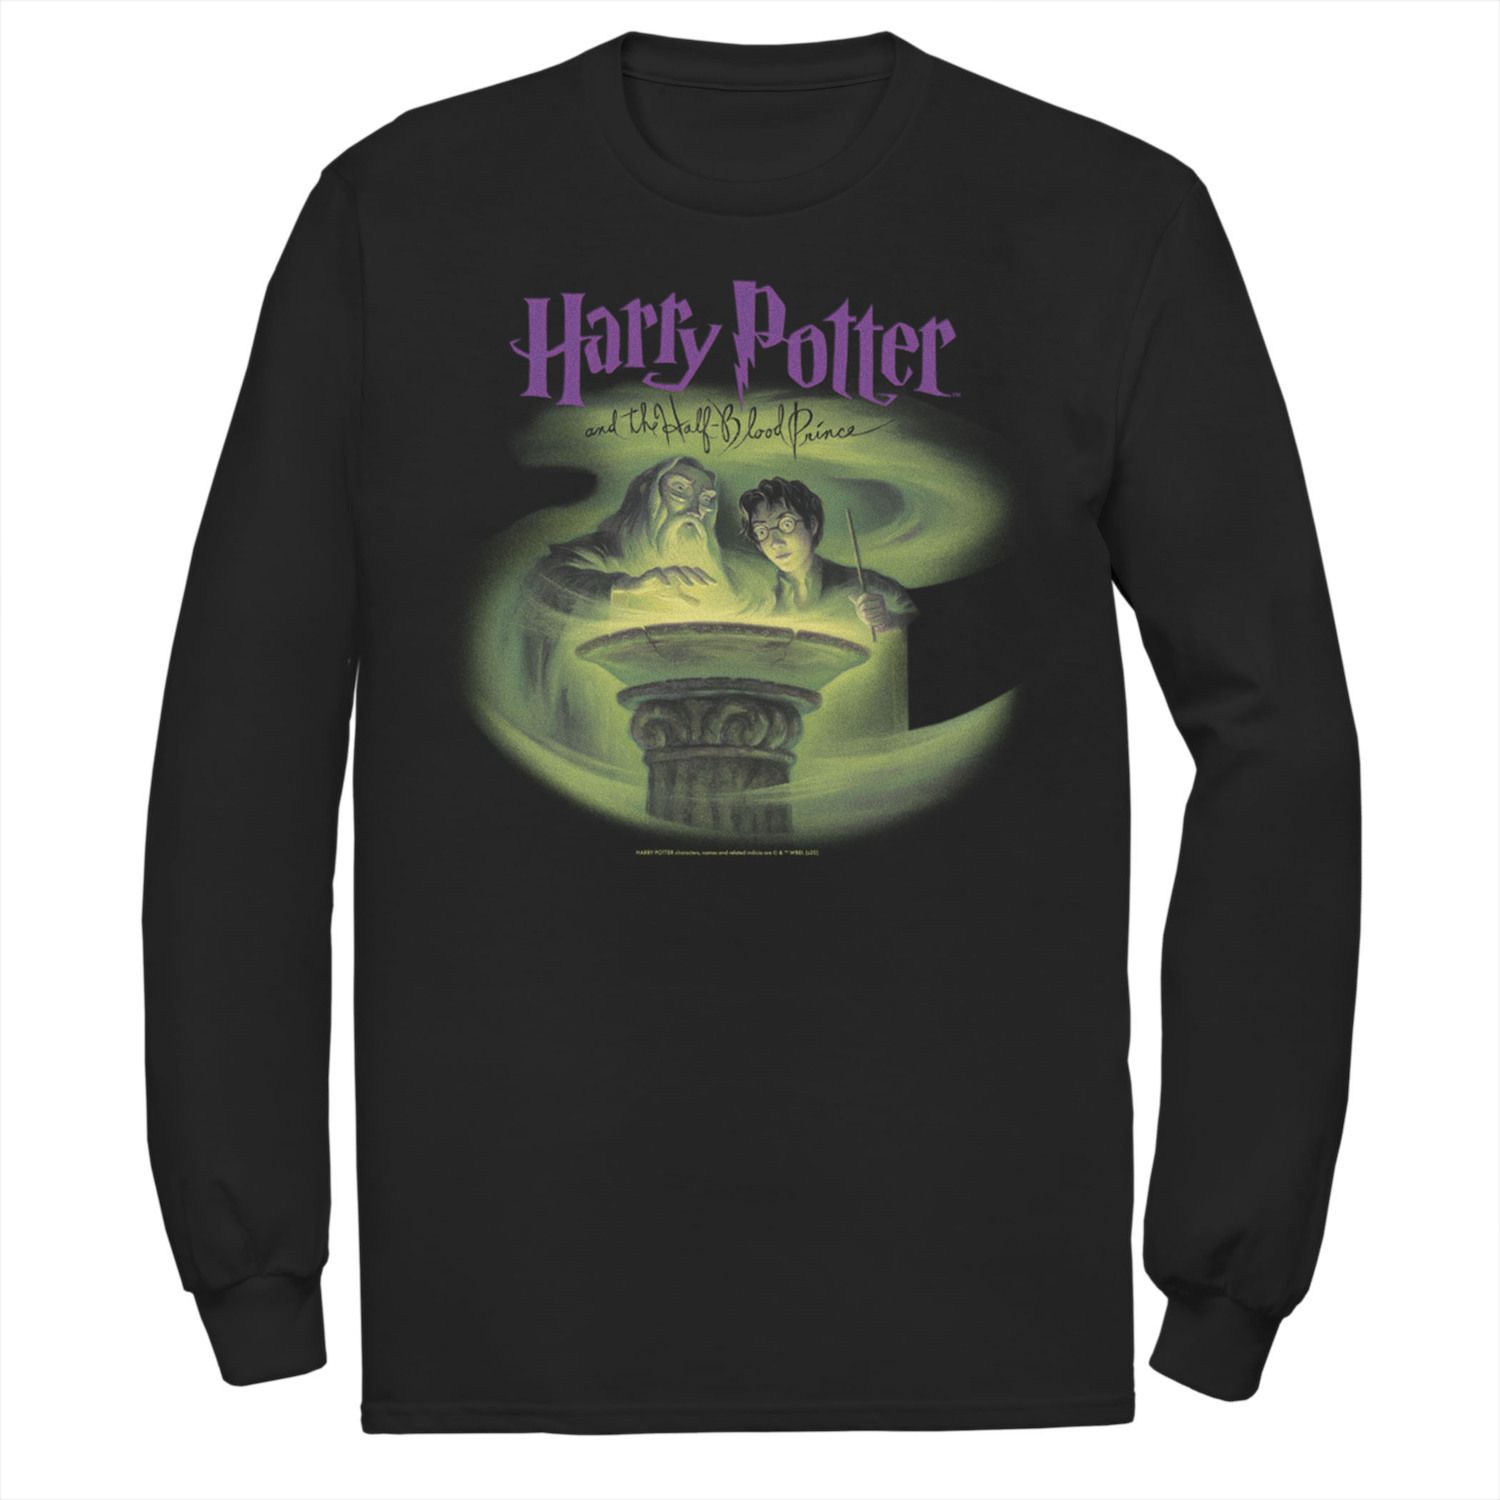 Image for Harry Potter Men's Prince Cover Poster Tee at Kohl's.